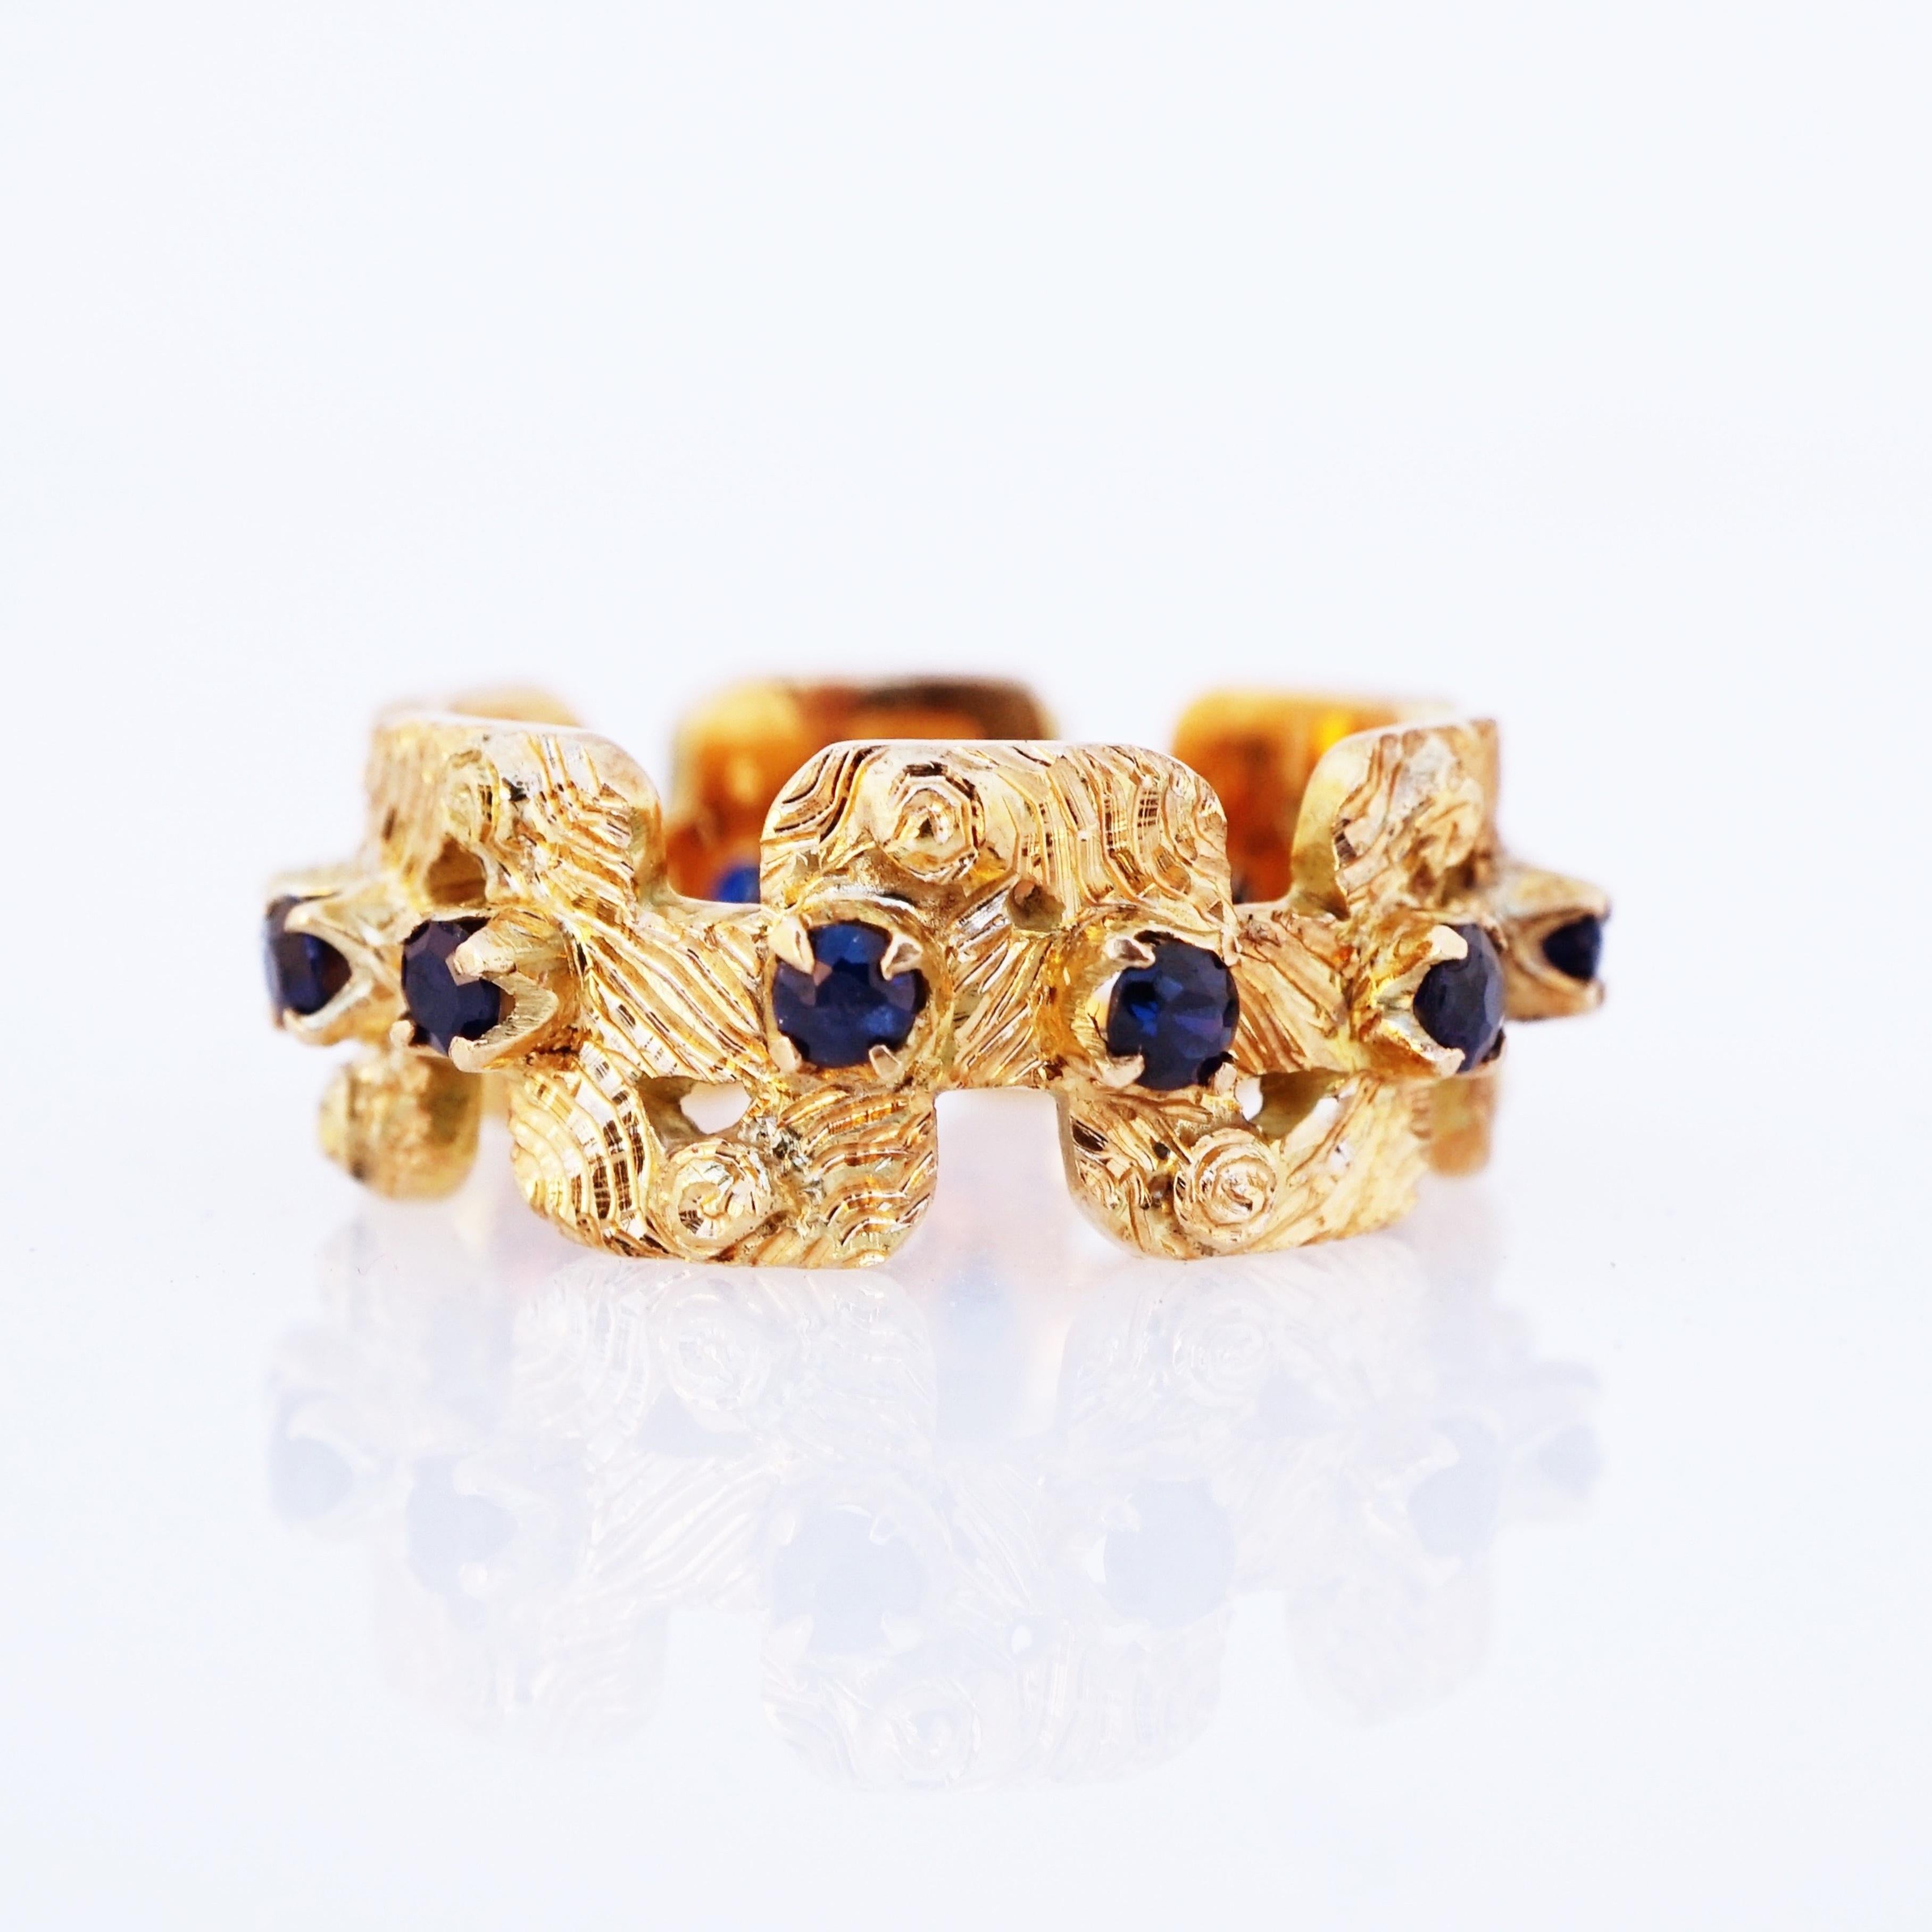 - Vintage item

- Collectible fine jewelry piece from the '70s

- Size 5.5 (US)

- 5.78 grams

- Solid 18 karat yellow gold (electronic tested)

- Faceted Sapphire precious gemstones surround the entire band

- Circa 1970s

- Estate Acquired

-